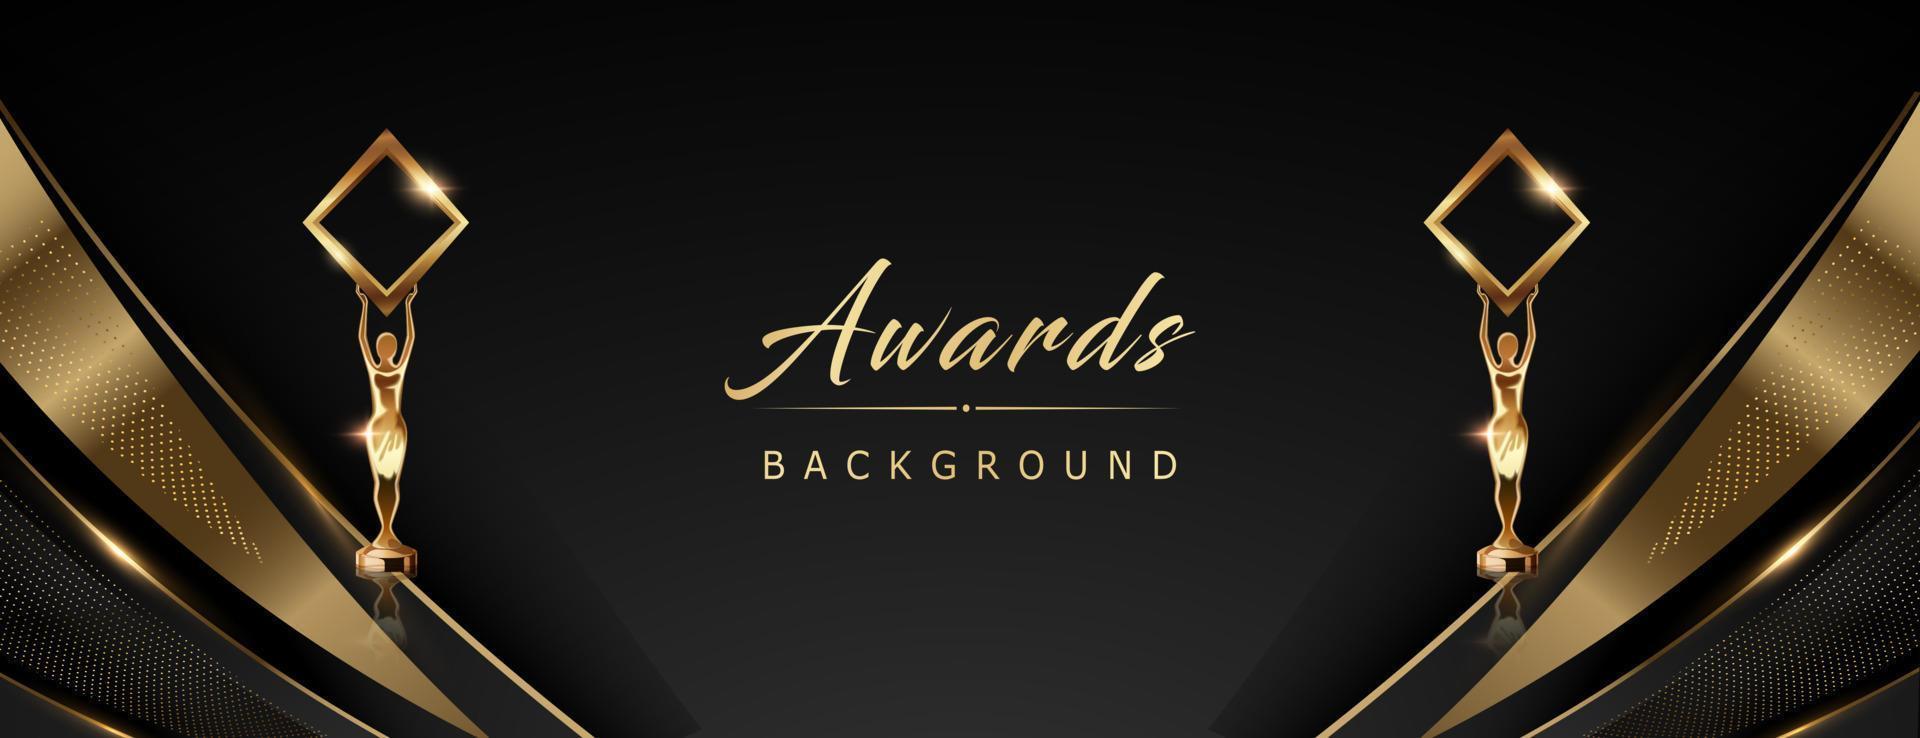 Black Golden Stage Award Background. Side Corner Lines Trophy on Luxury Background. Modern Abstract Design Template. LED Visual Motion Graphics. Wedding Marriage Invitation Poster. vector